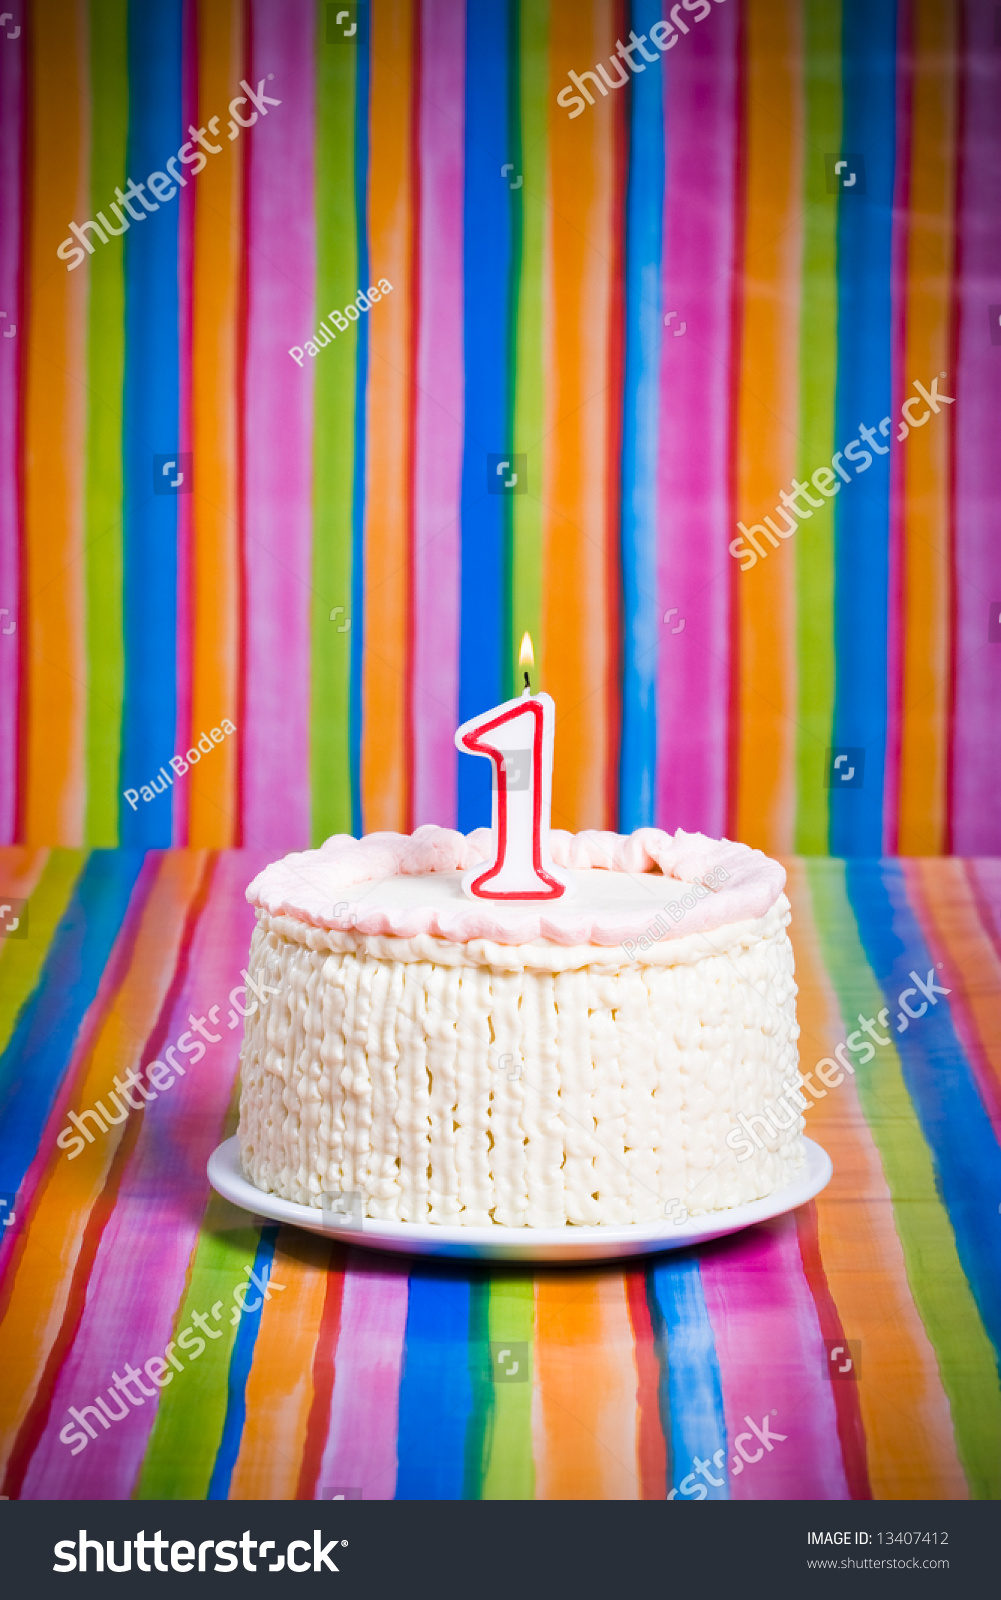 A Cake With A Candle Stock Photo 13407412 : Shutterstock